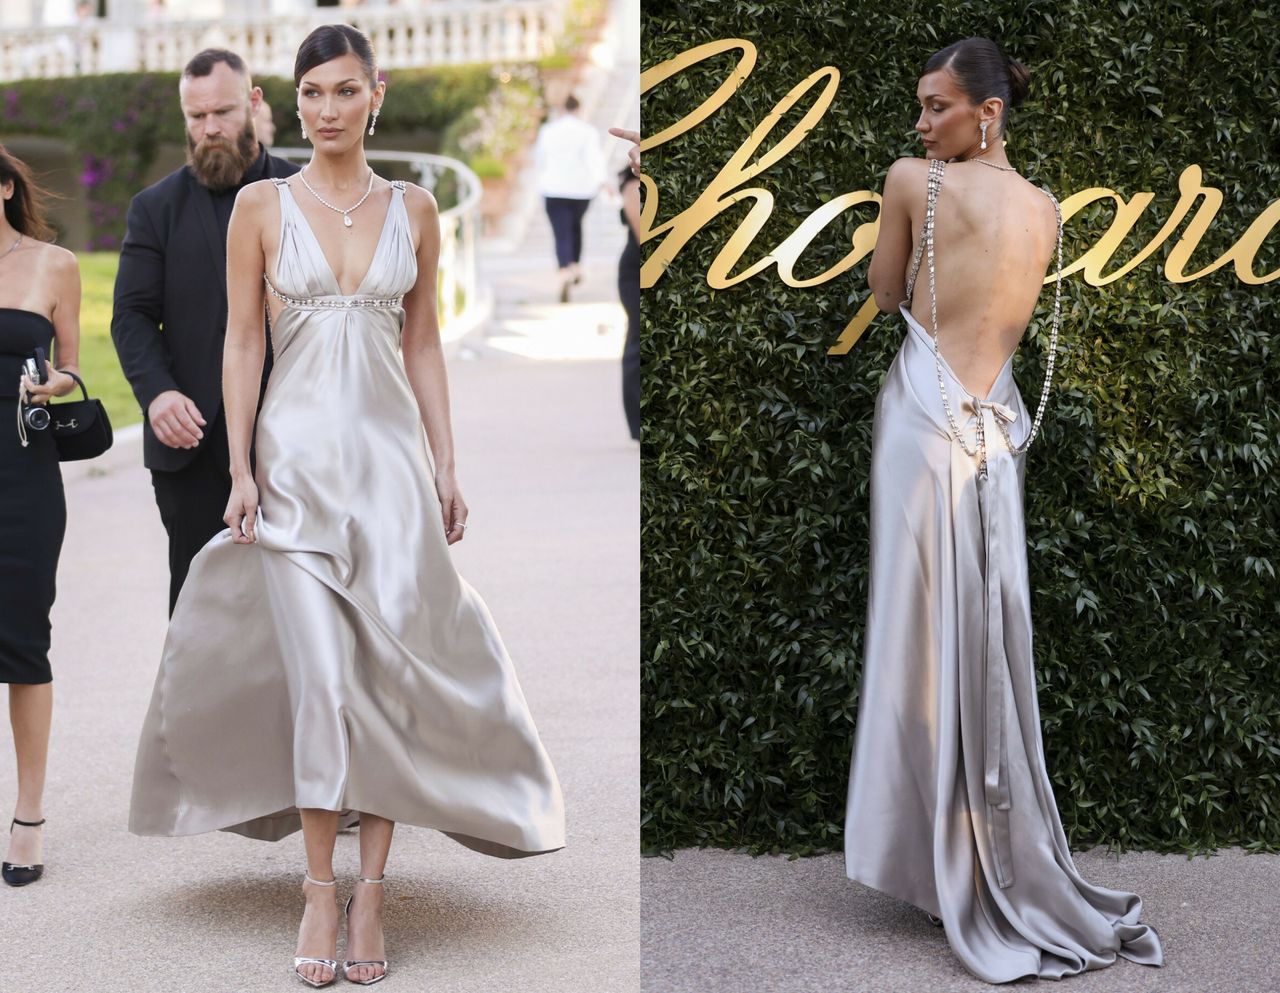 Bella Hadid in a satin creation at the Chopard party